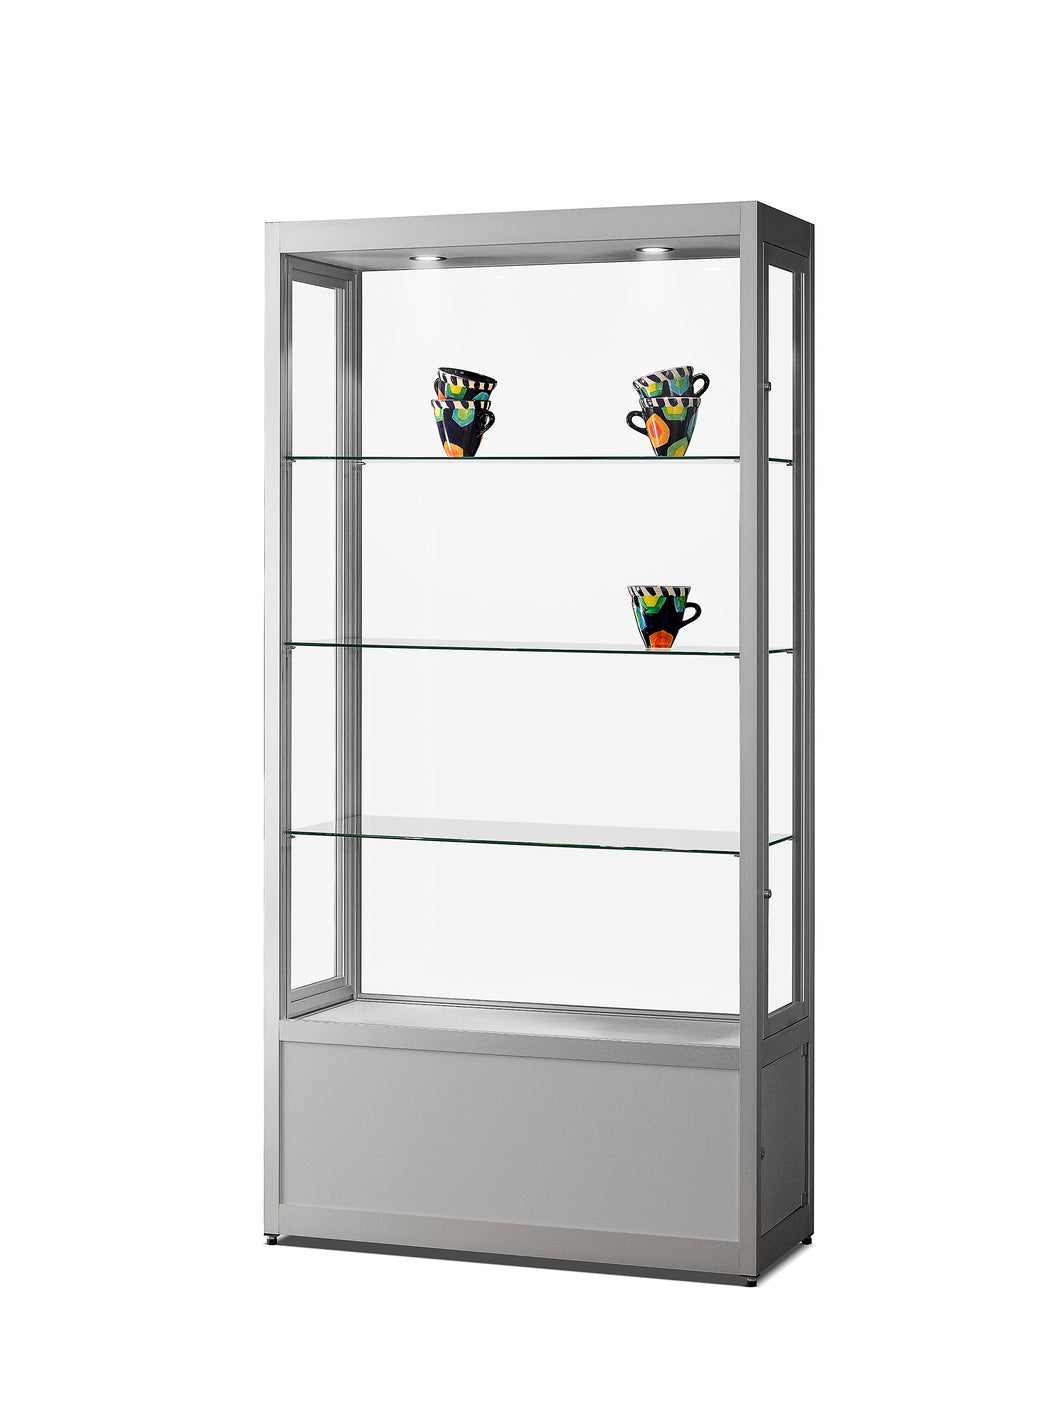 Olympus V8 Light 1000 Dustproof Glass Display Cabinet with Storage